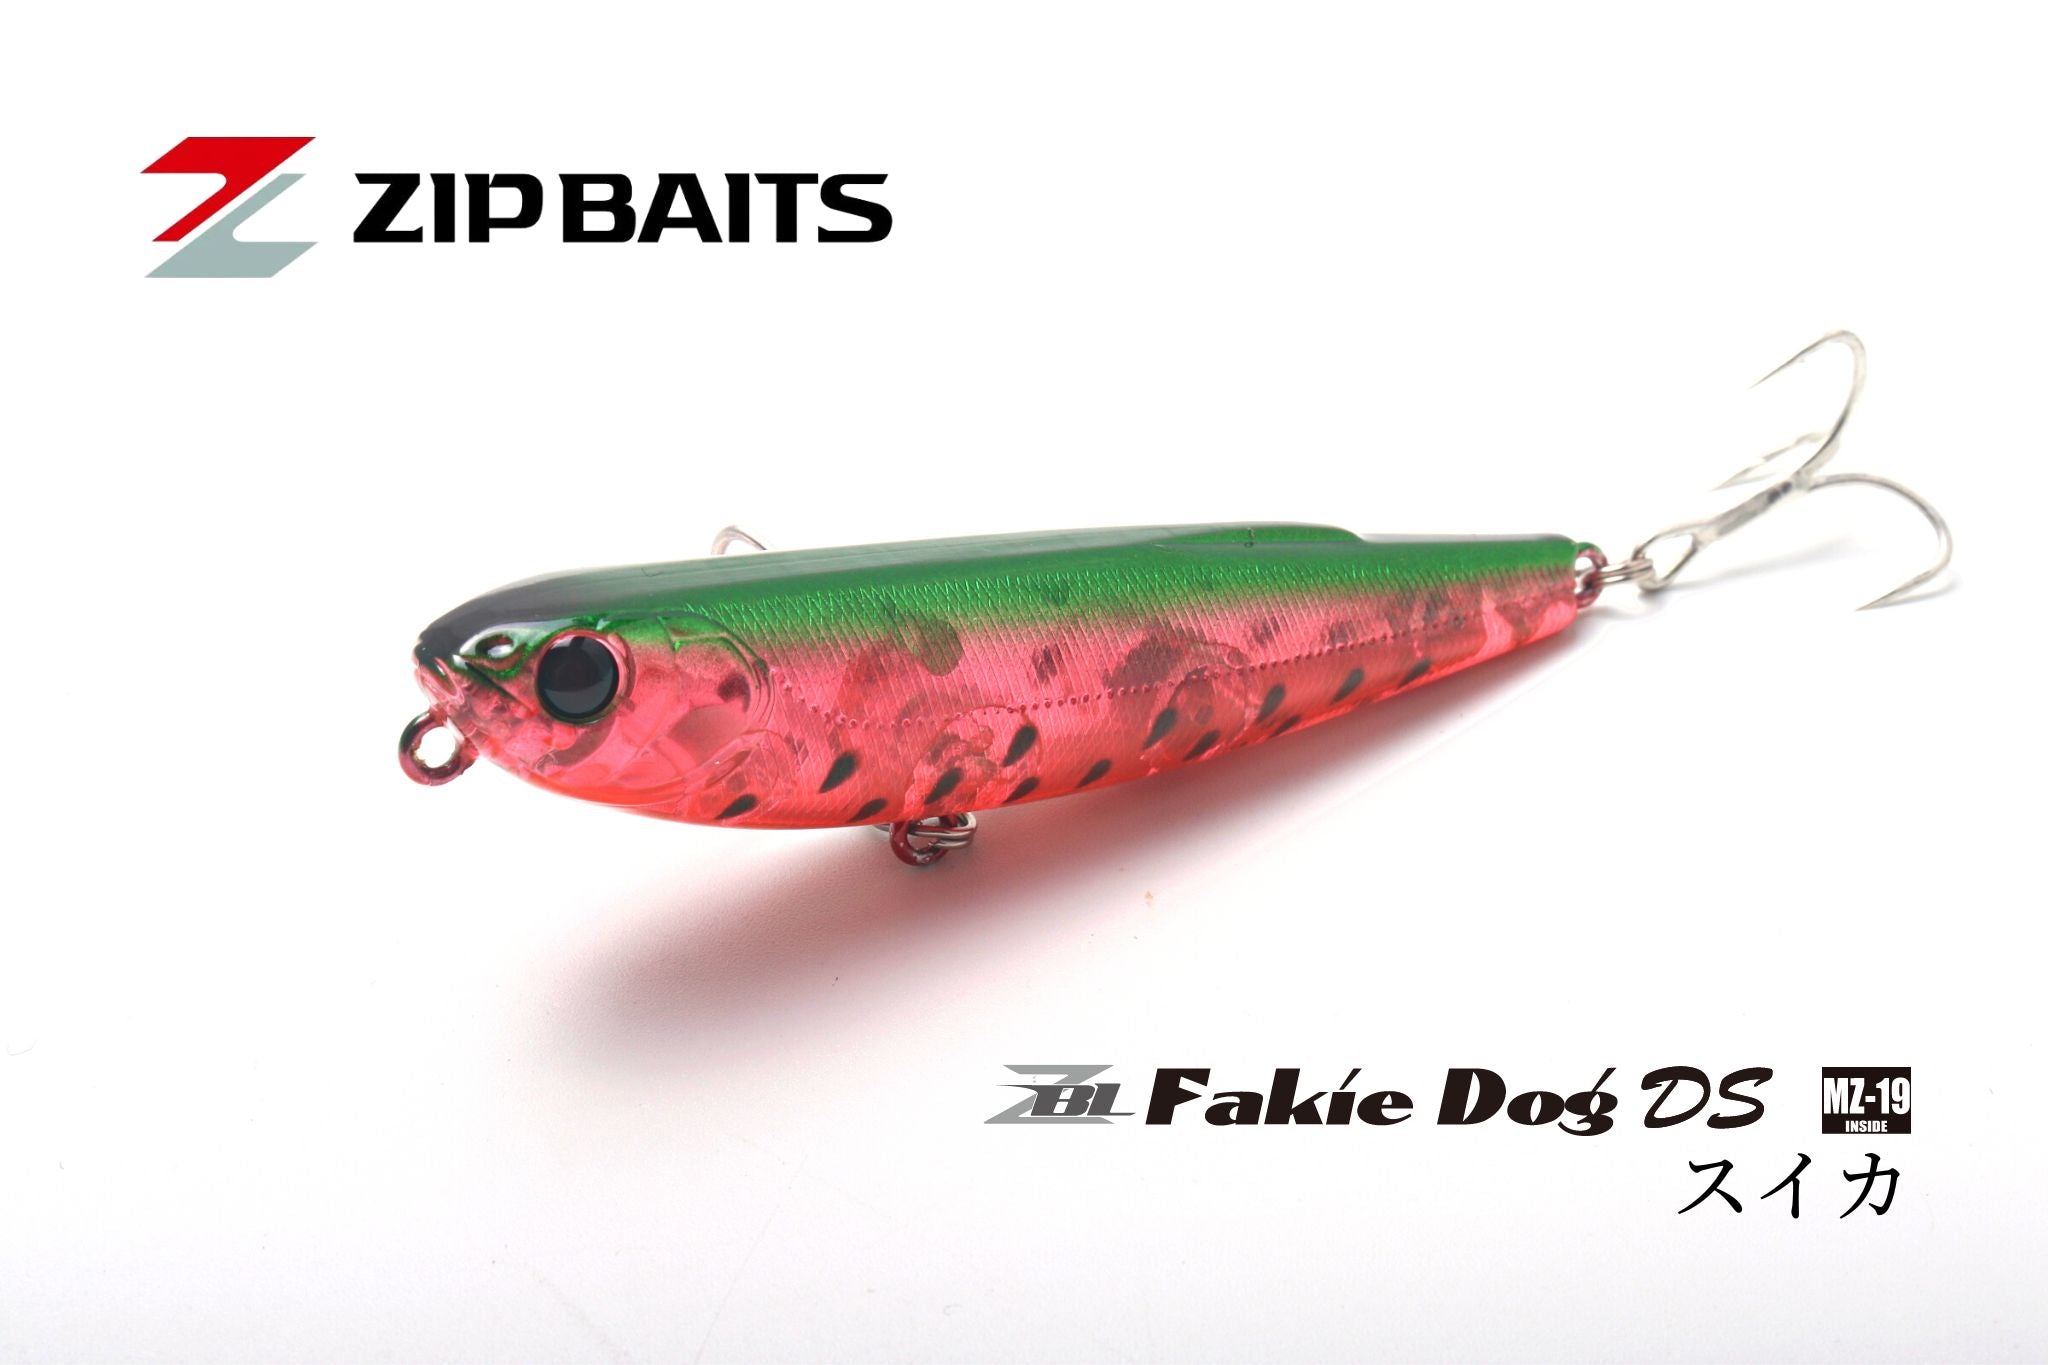 ZBL Fakie Dog/ザブラフェイキードッグDS | 宮崎市の釣具店 FISHING BASE PLAISANCE